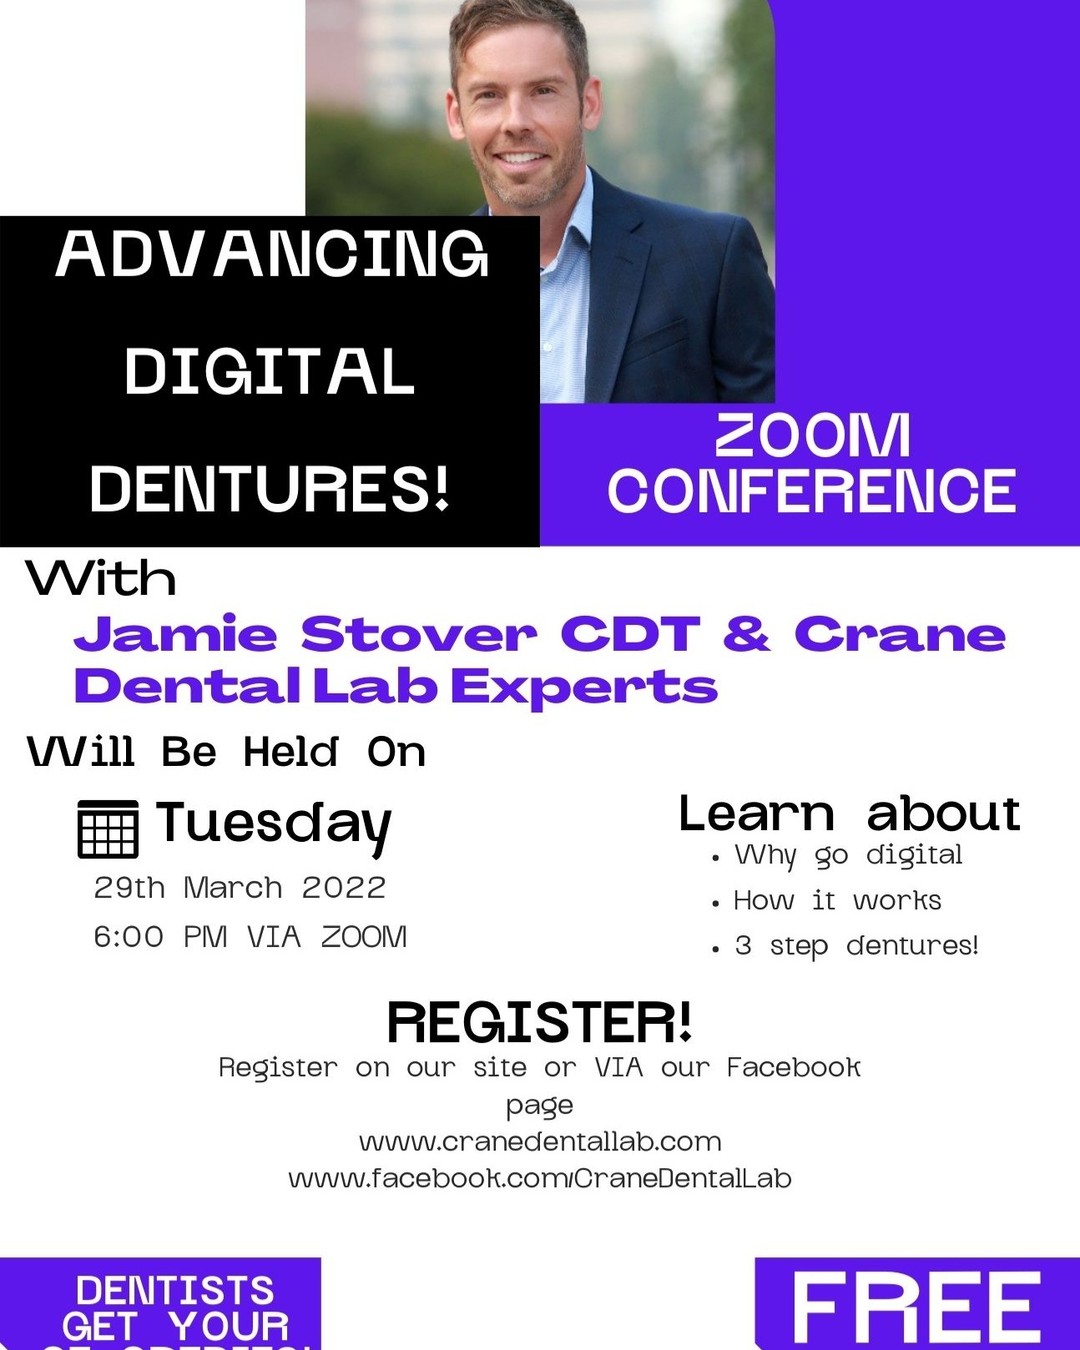 Come join us and learn why digital dentures is changing the landscape of dentistry!